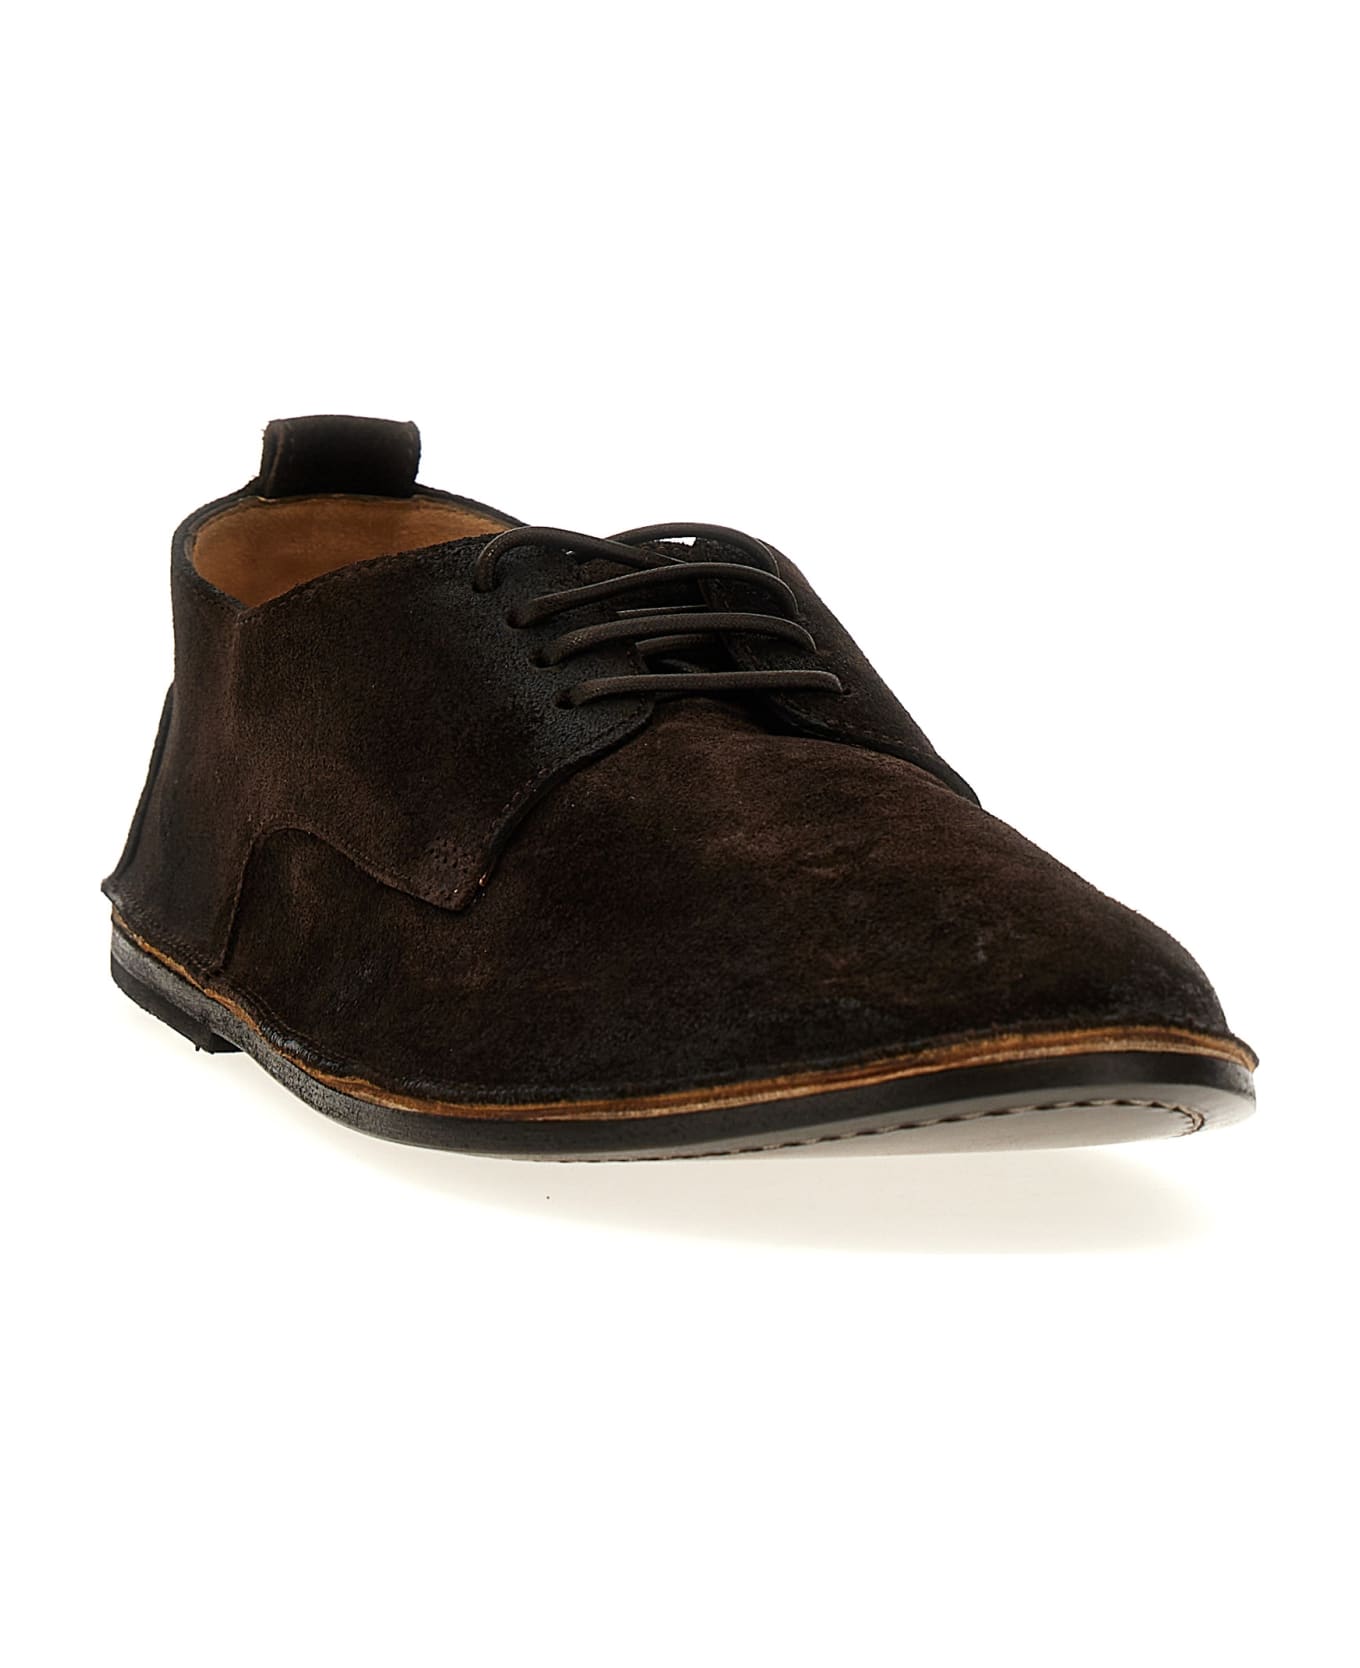 Marsell 'strasacco' Lace Up Shoes - Brown ローファー＆デッキシューズ